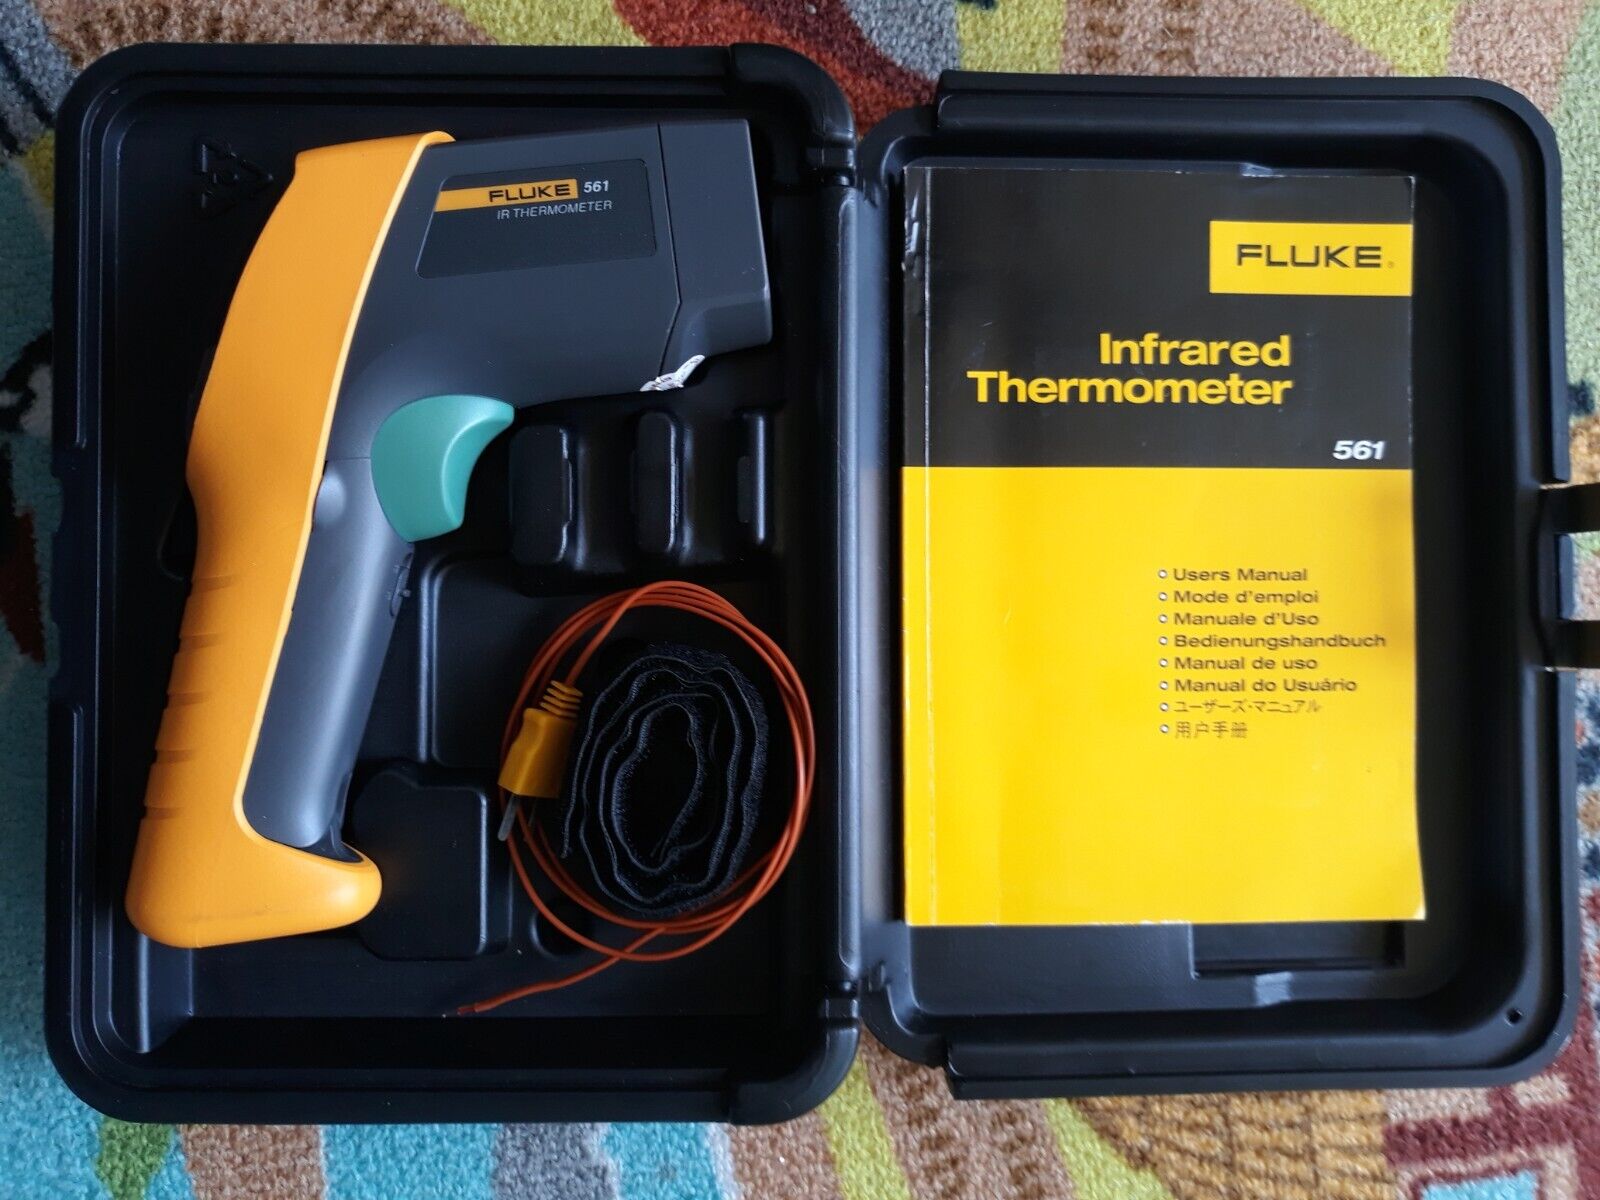 Fluke 561 Infrared and Contact Thermometer with Case 